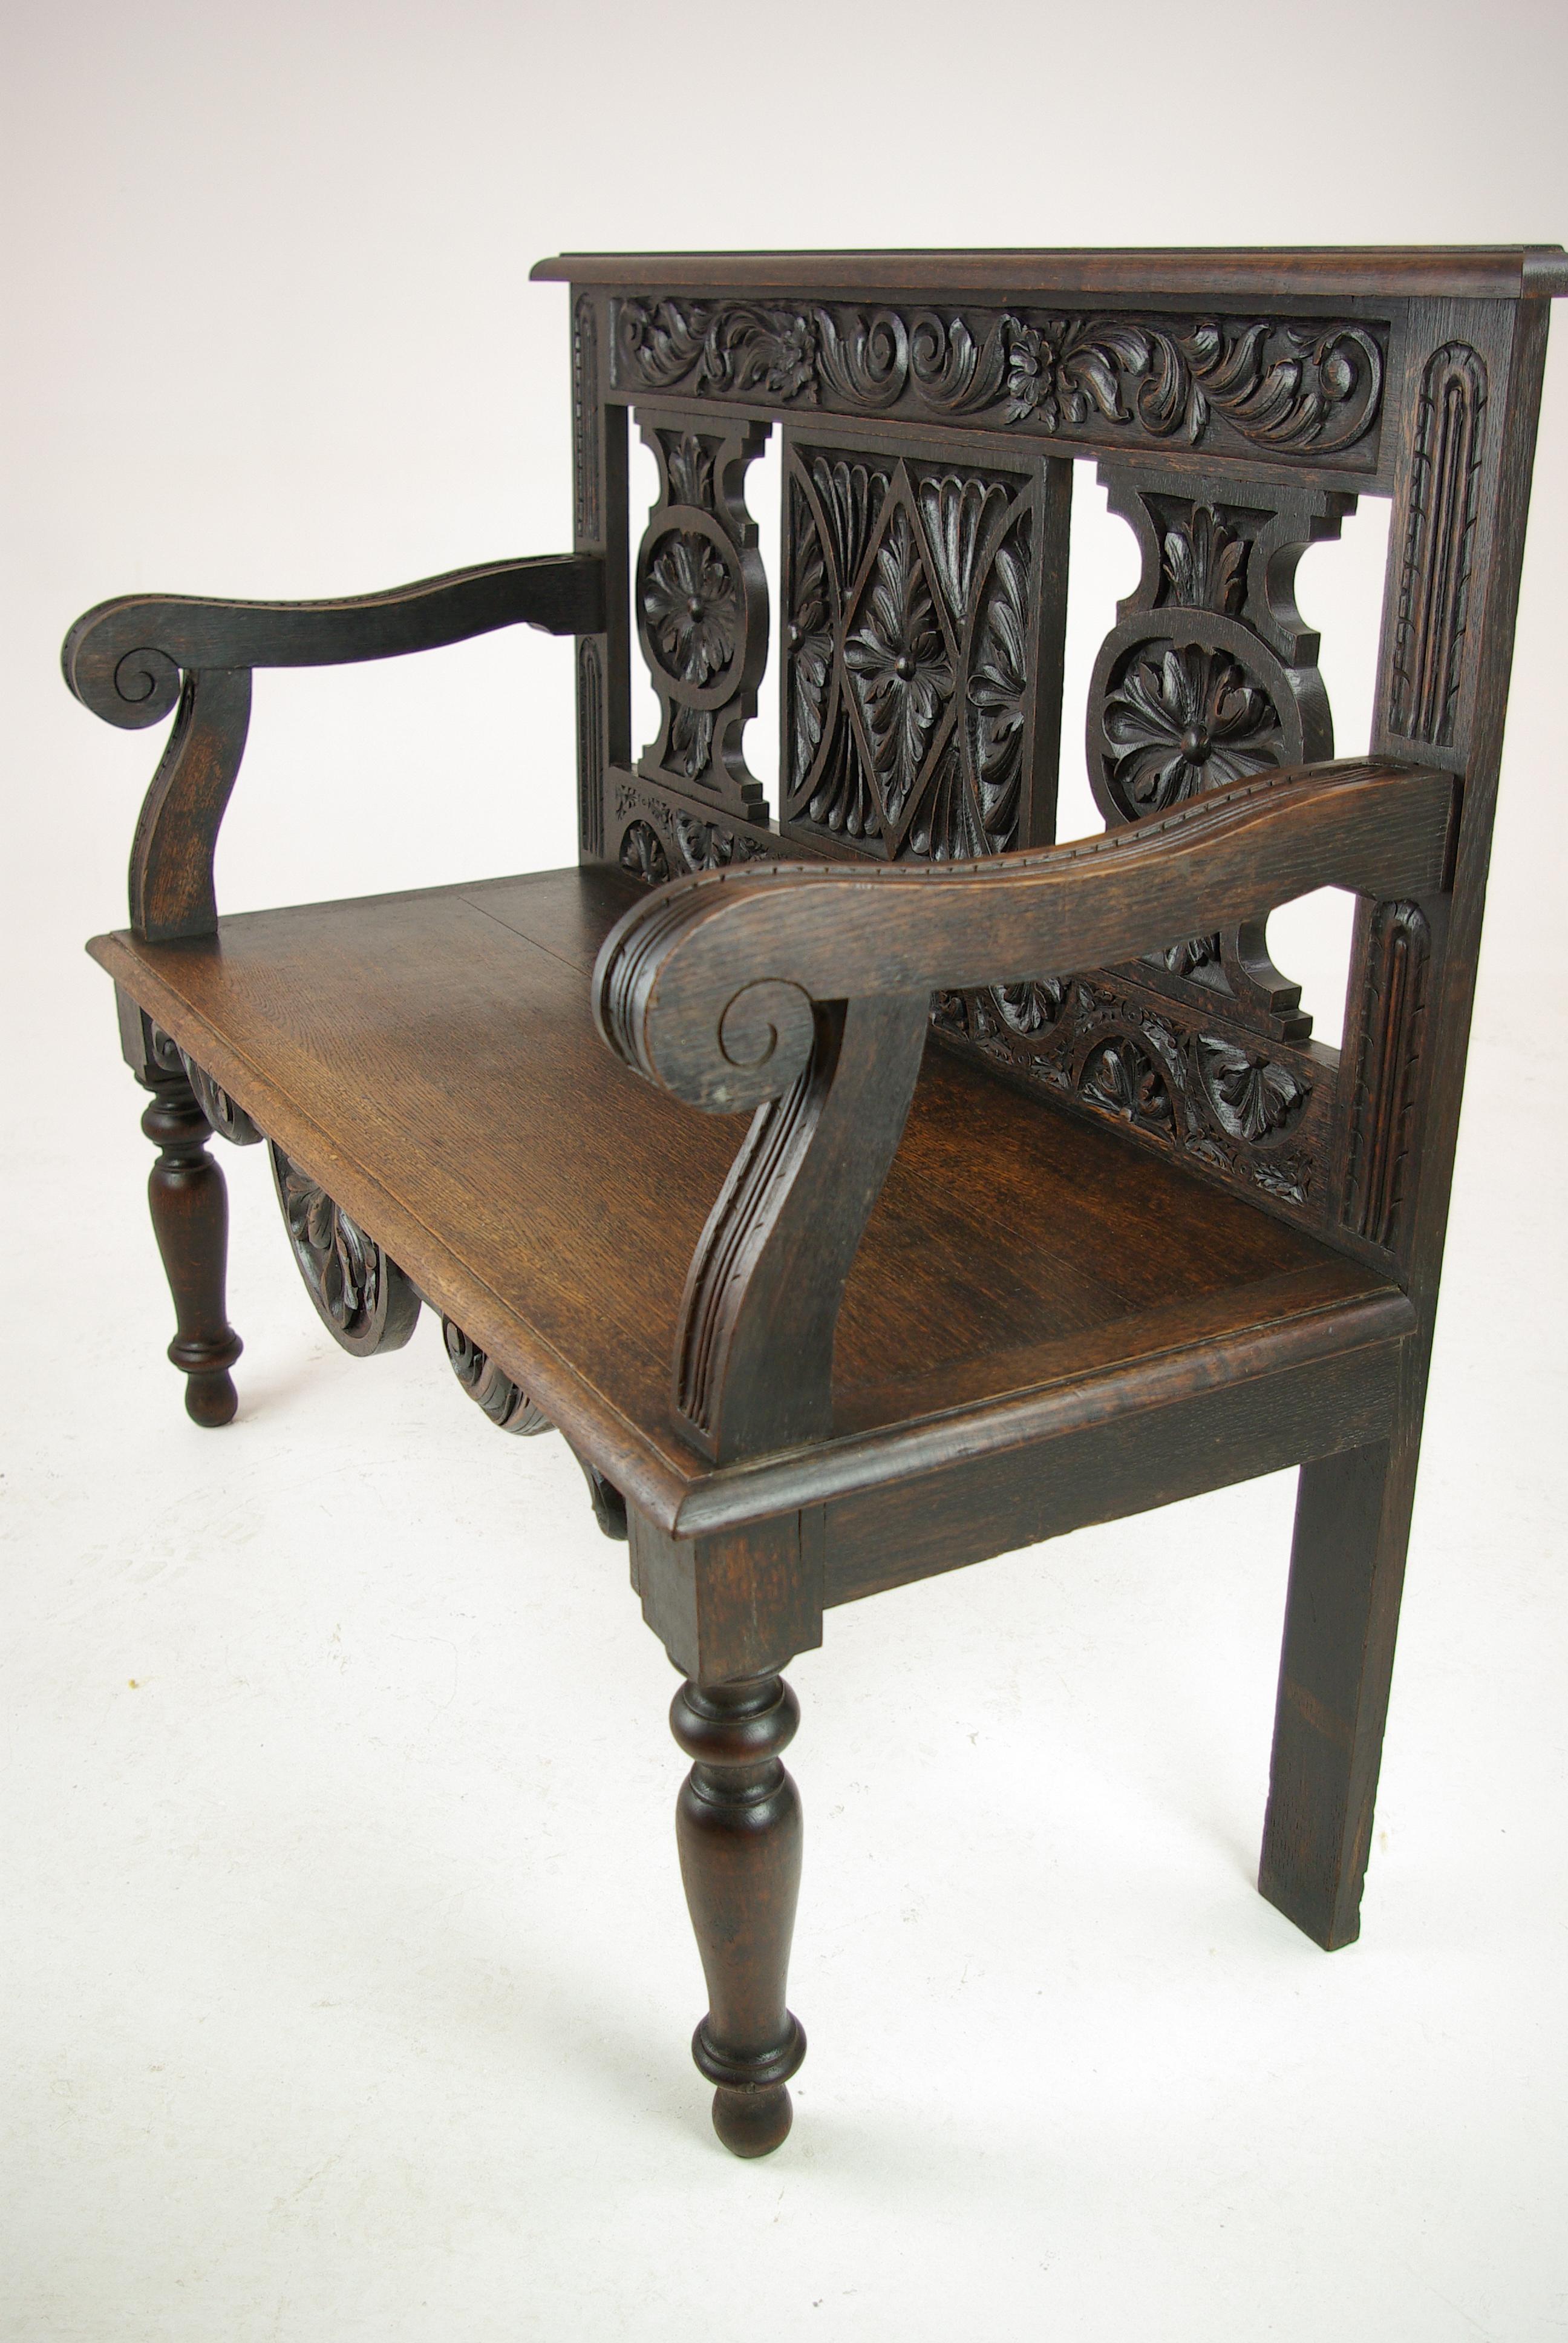 Hand-Carved Hall Bench, Hall Seat, Carved Oak Bench, Entryway Furniture, 1880